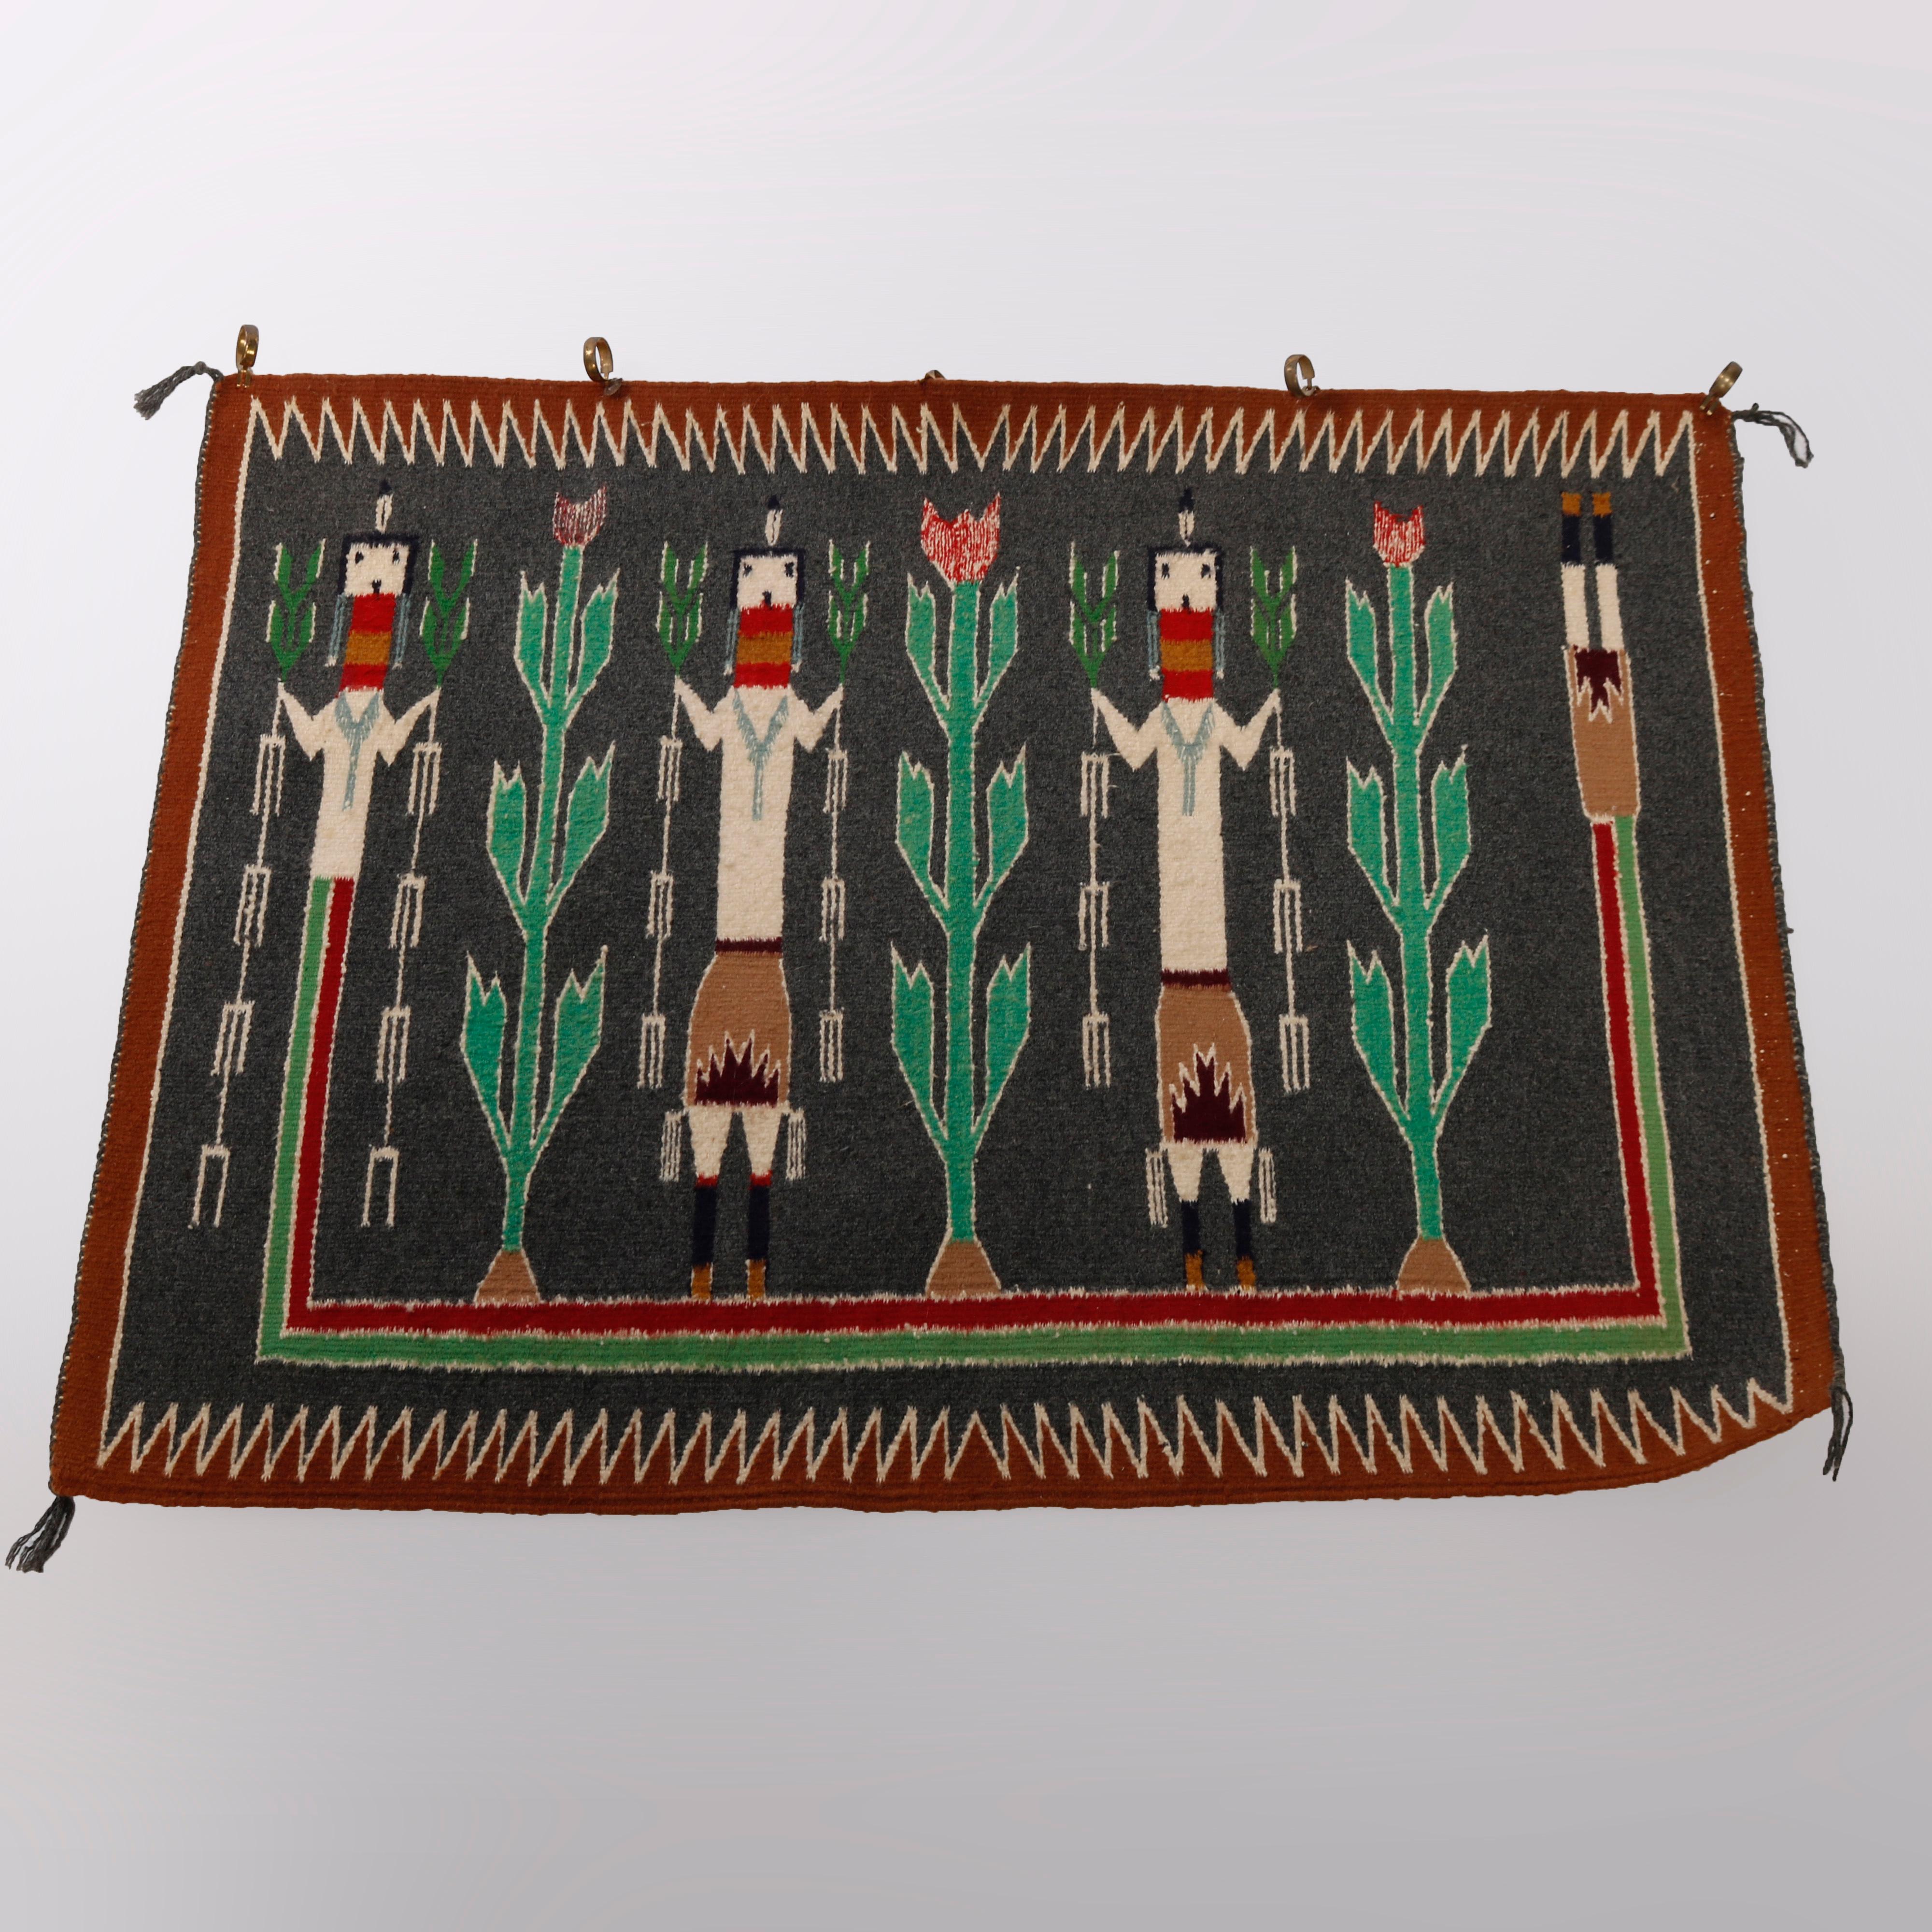 An antique Southwestern Native American Indian Navajo Yei rug offers wool construction with three men and crop harvest design, c1930

Measures - 34.75''H x 27.75''W x .5''D.